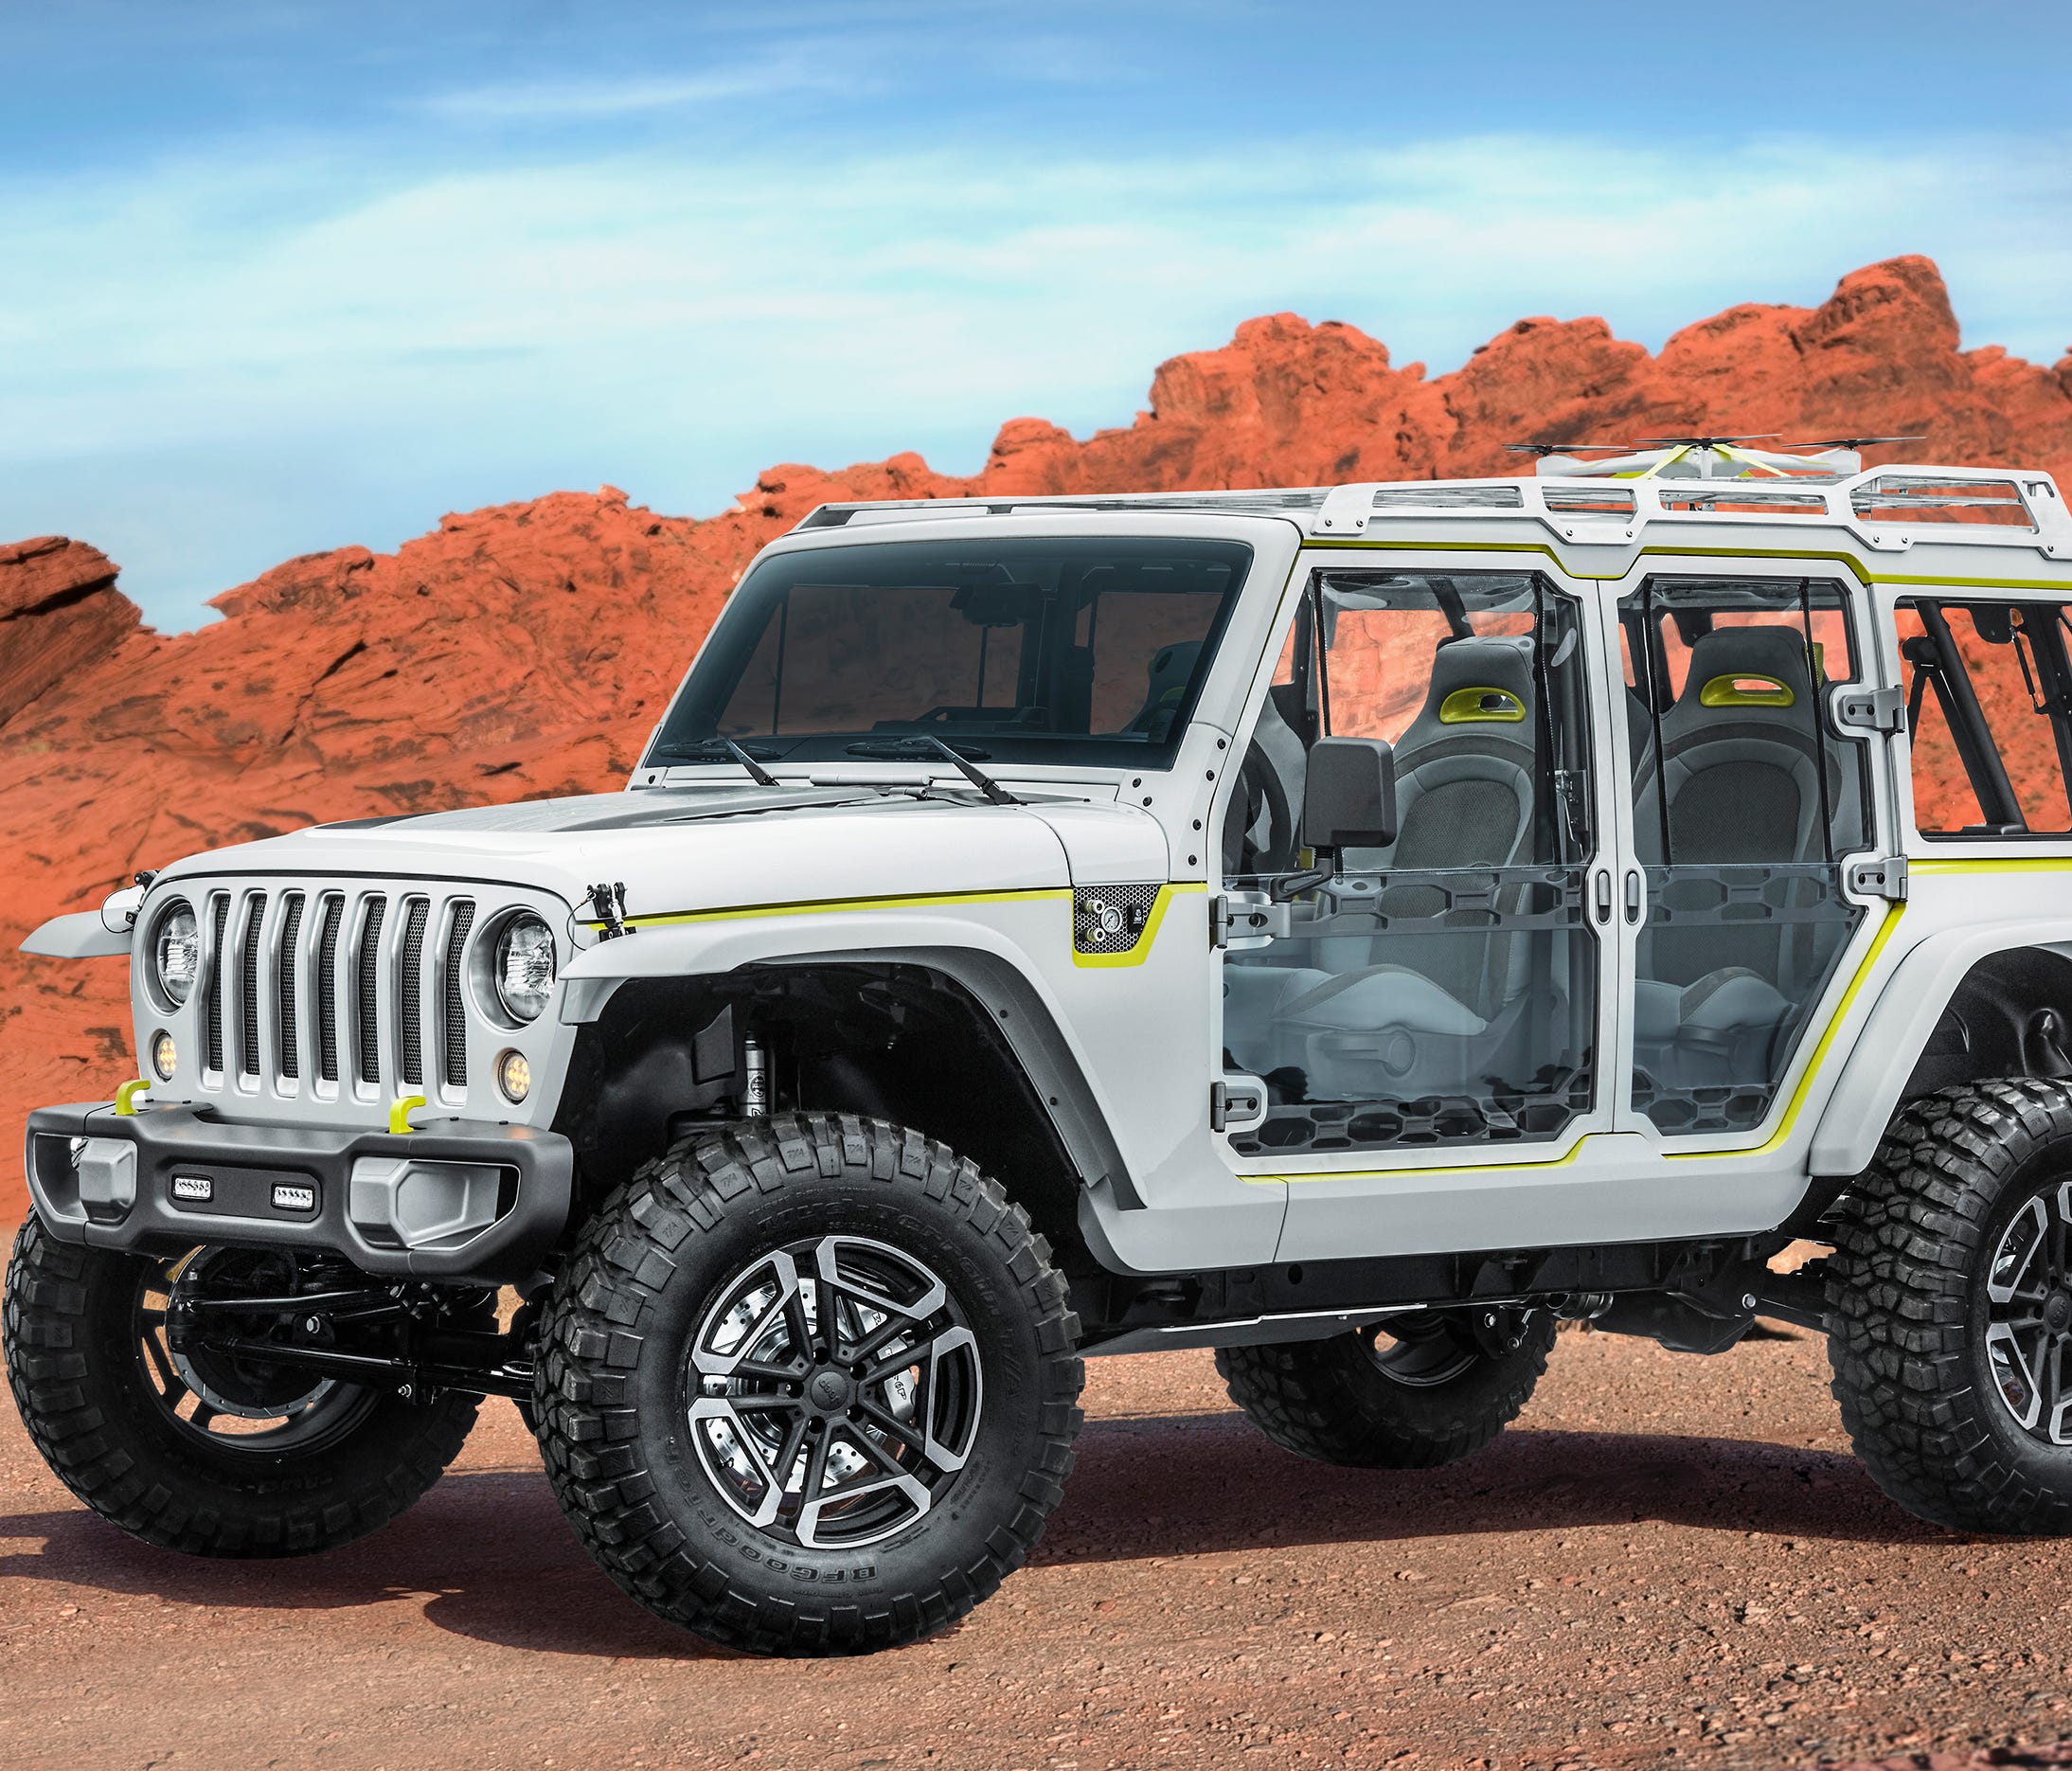 Jeep Safari Concept is one of the vehicle concepts that the brand will show in Moab over Easter